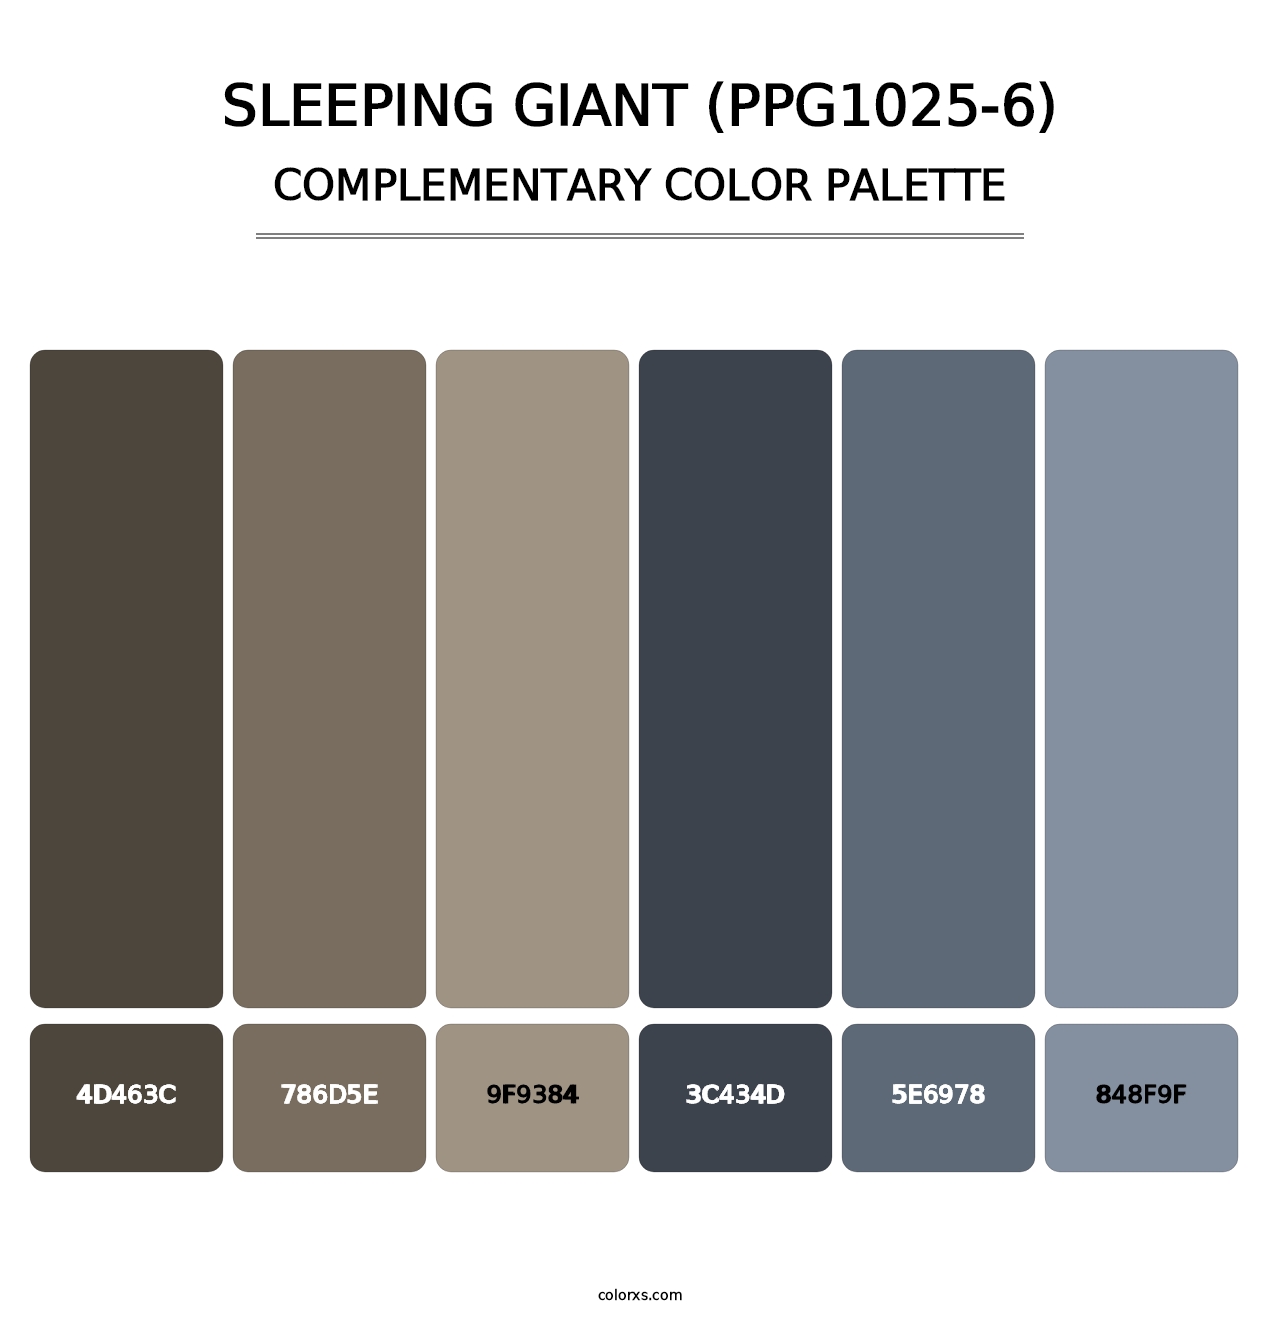 Sleeping Giant (PPG1025-6) - Complementary Color Palette